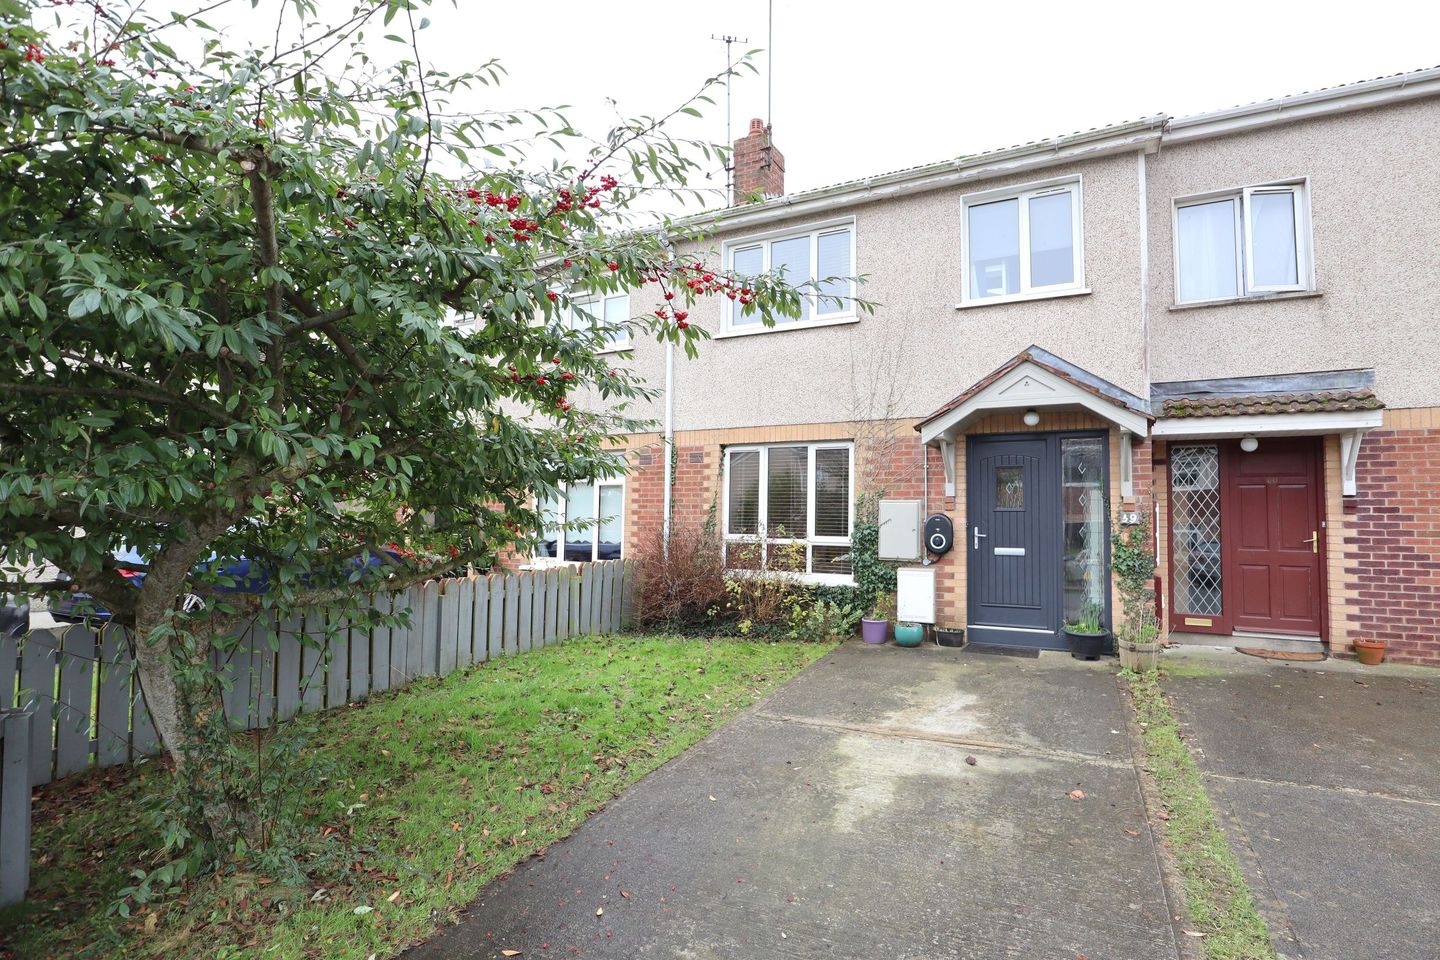 59 Cedarfield, Donore Road, Drogheda, Co. Louth